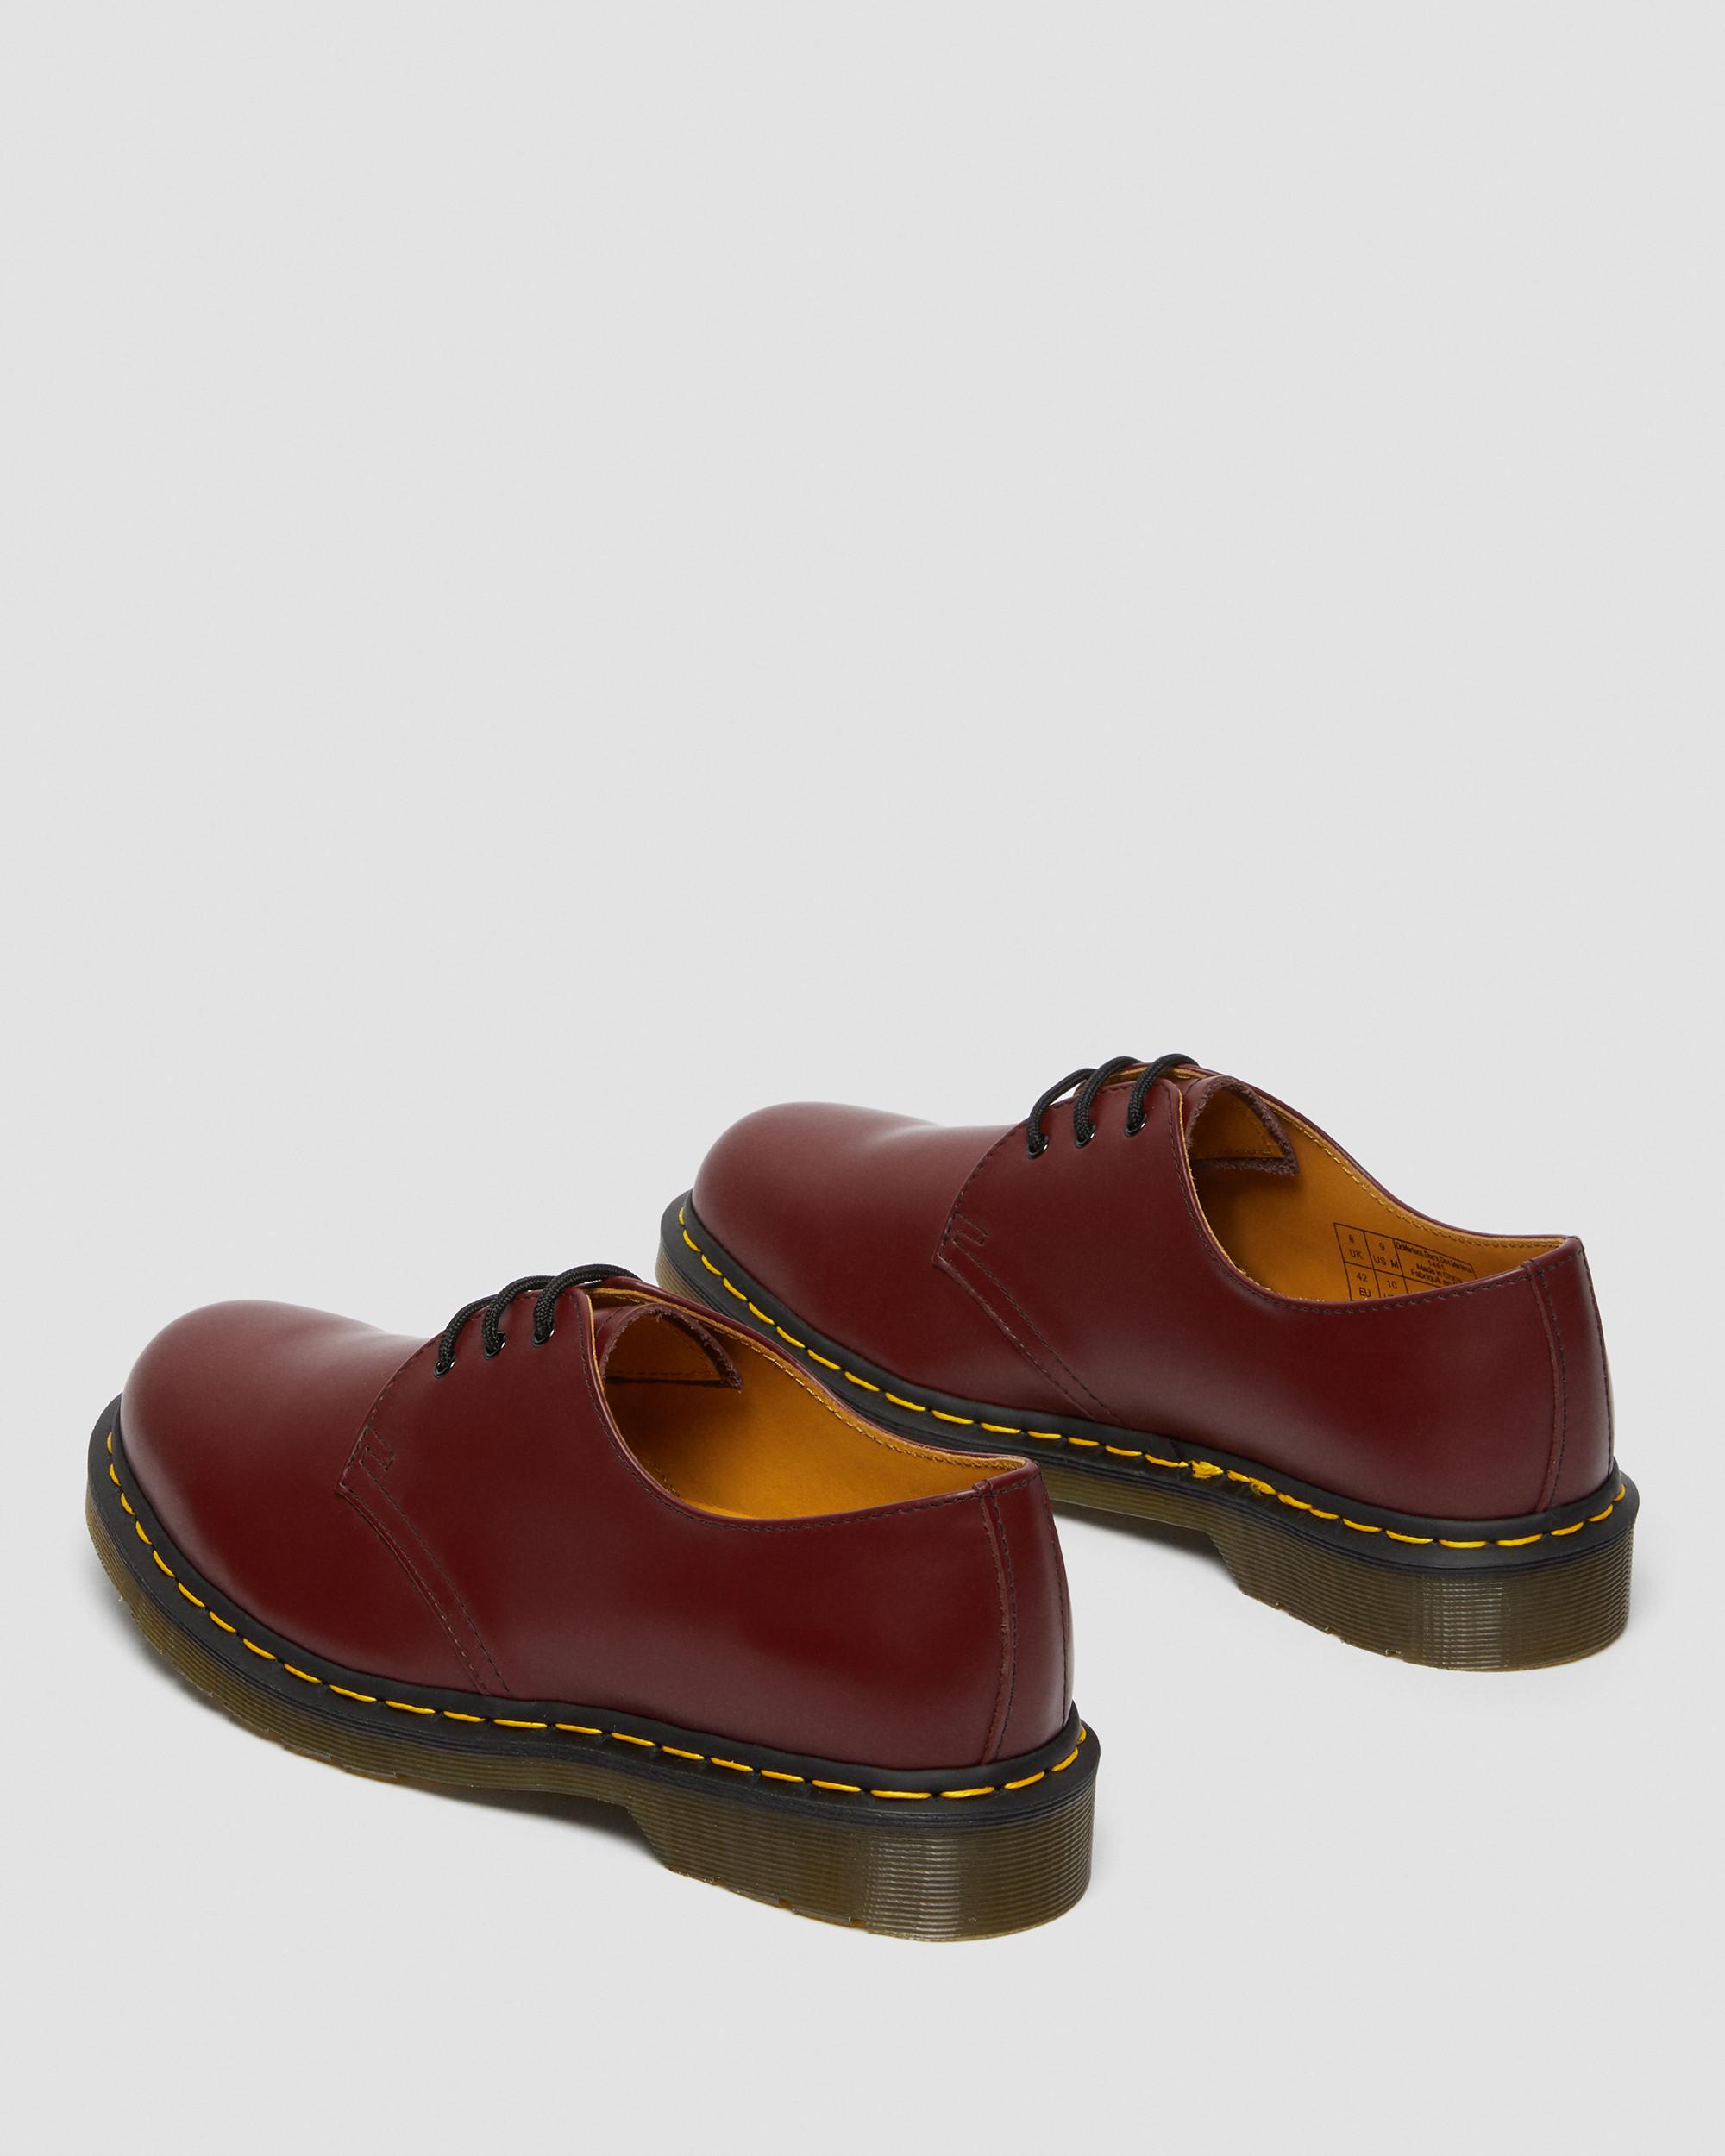 1461 Smooth Leather Oxford Shoes in Cherry Red | Dr. Martens